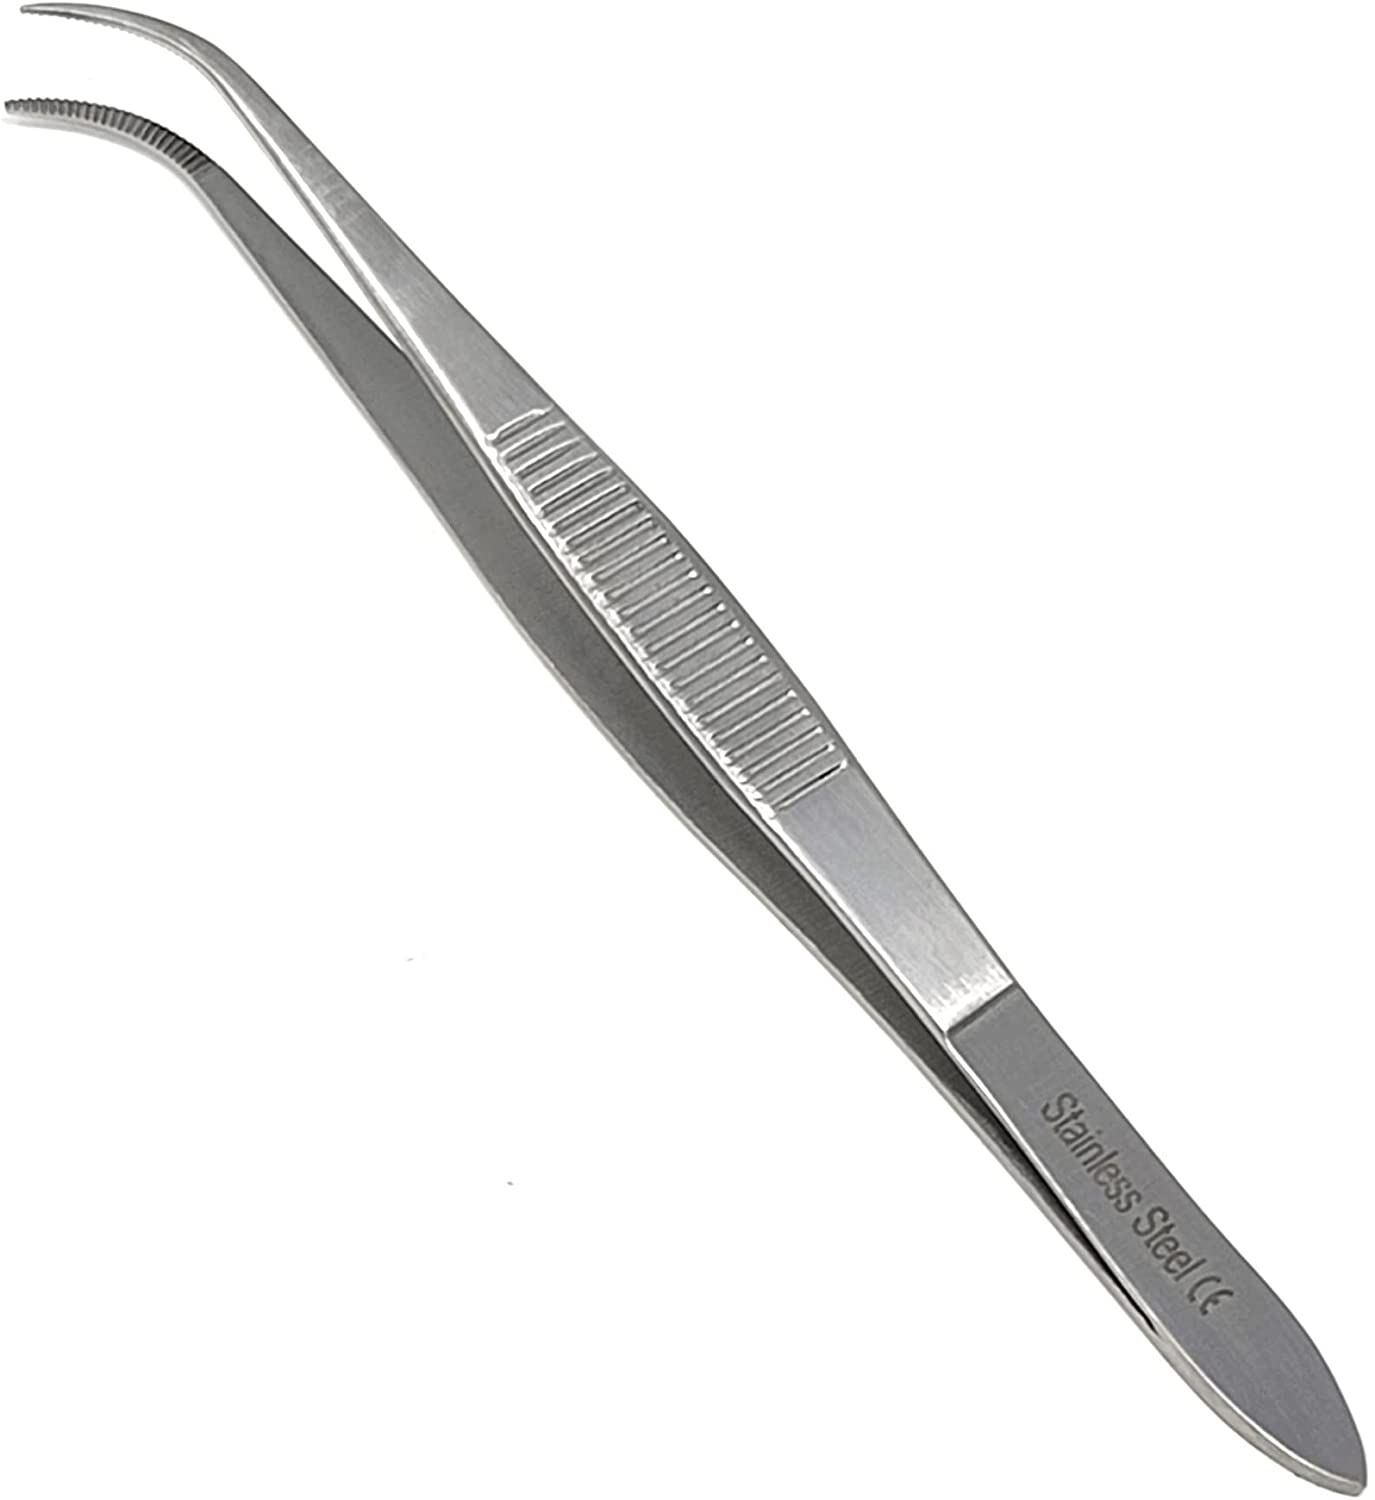 Iris Eye Dressing Dissecting Forceps 4" Fine Point Half Curved Serrated Tips